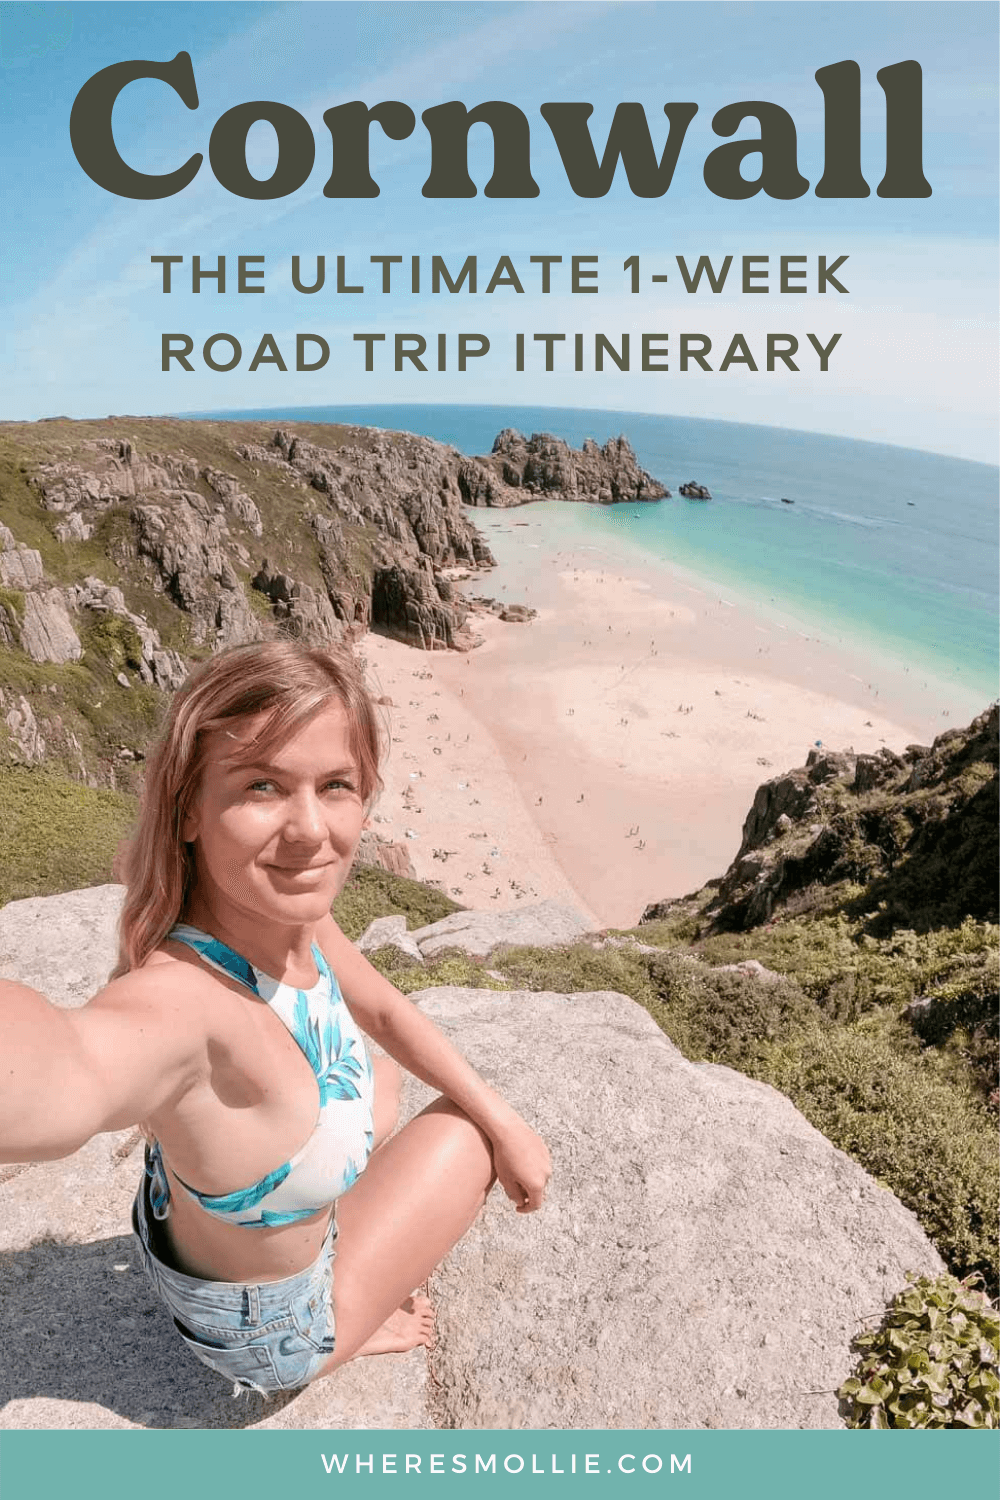 A 1-week road trip itinerary for Cornwall